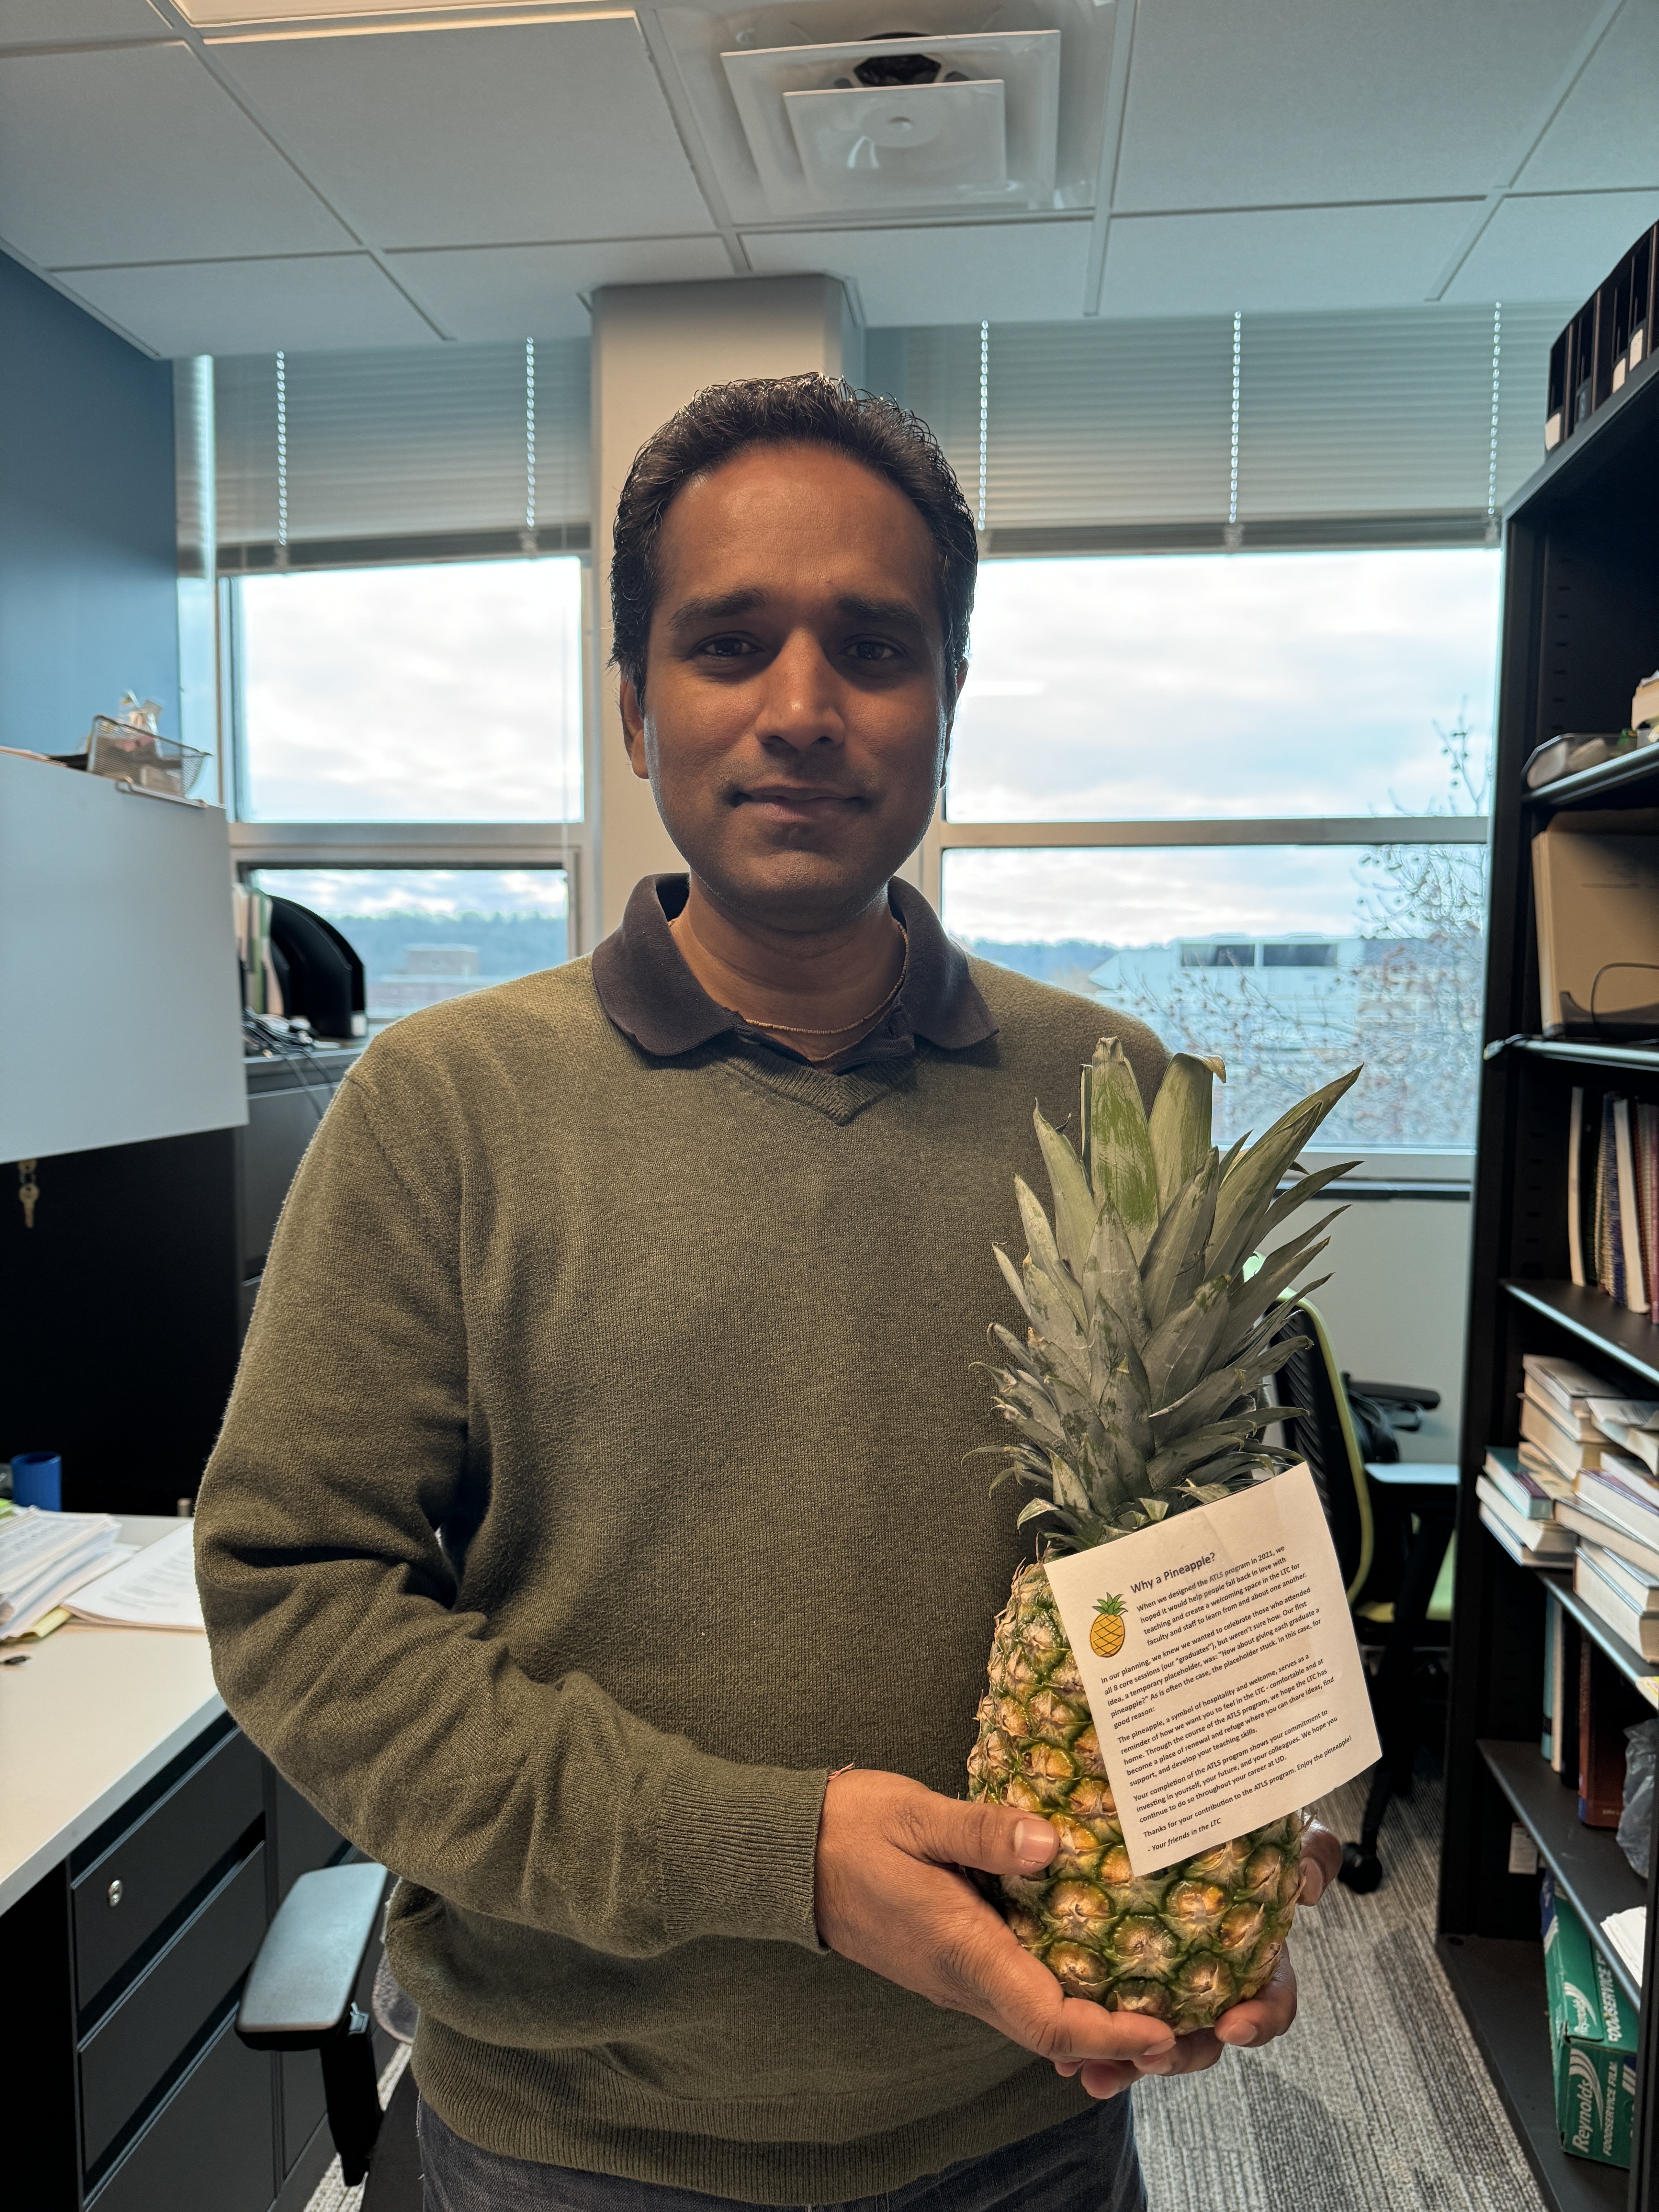 Faculty member Mrigendra Rajput poses with a pineapple and diploma to signify graduation from ATLS.